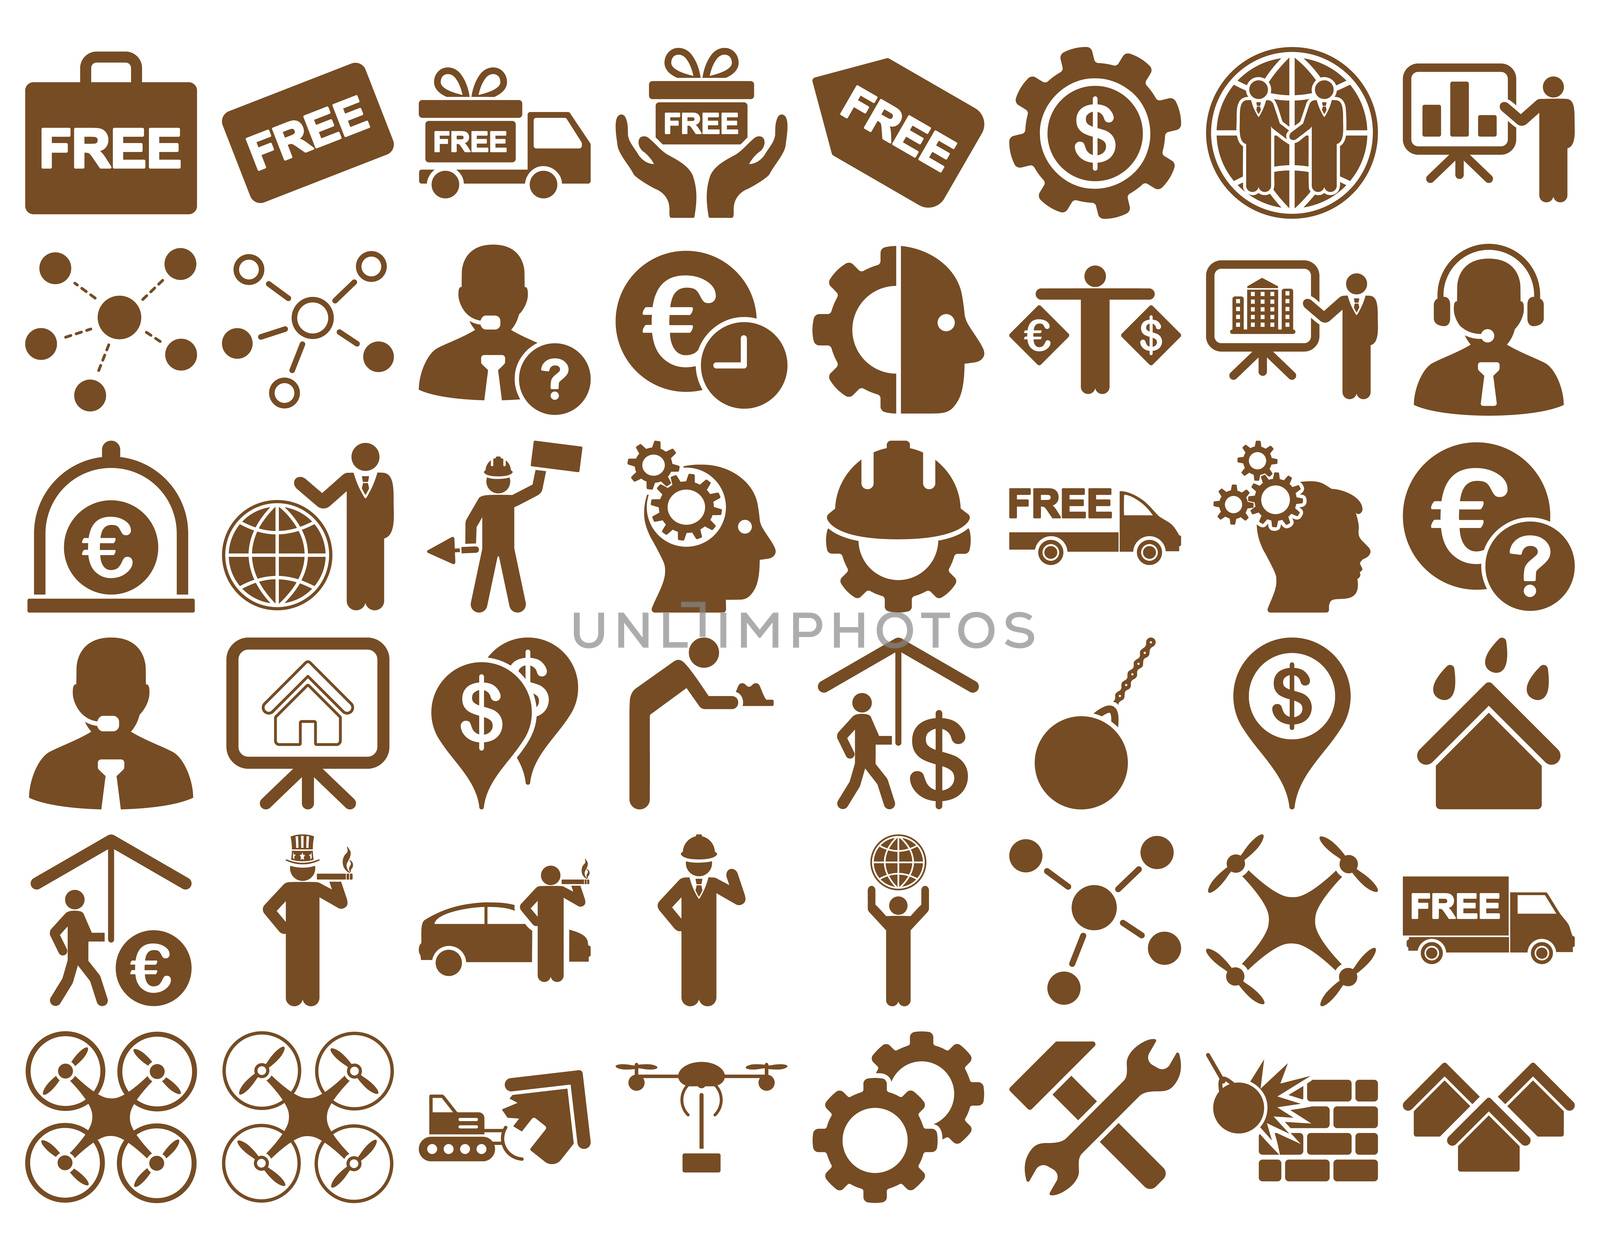 Business Icon Set. These flat icons use brown color. Raster images are isolated on a white background.